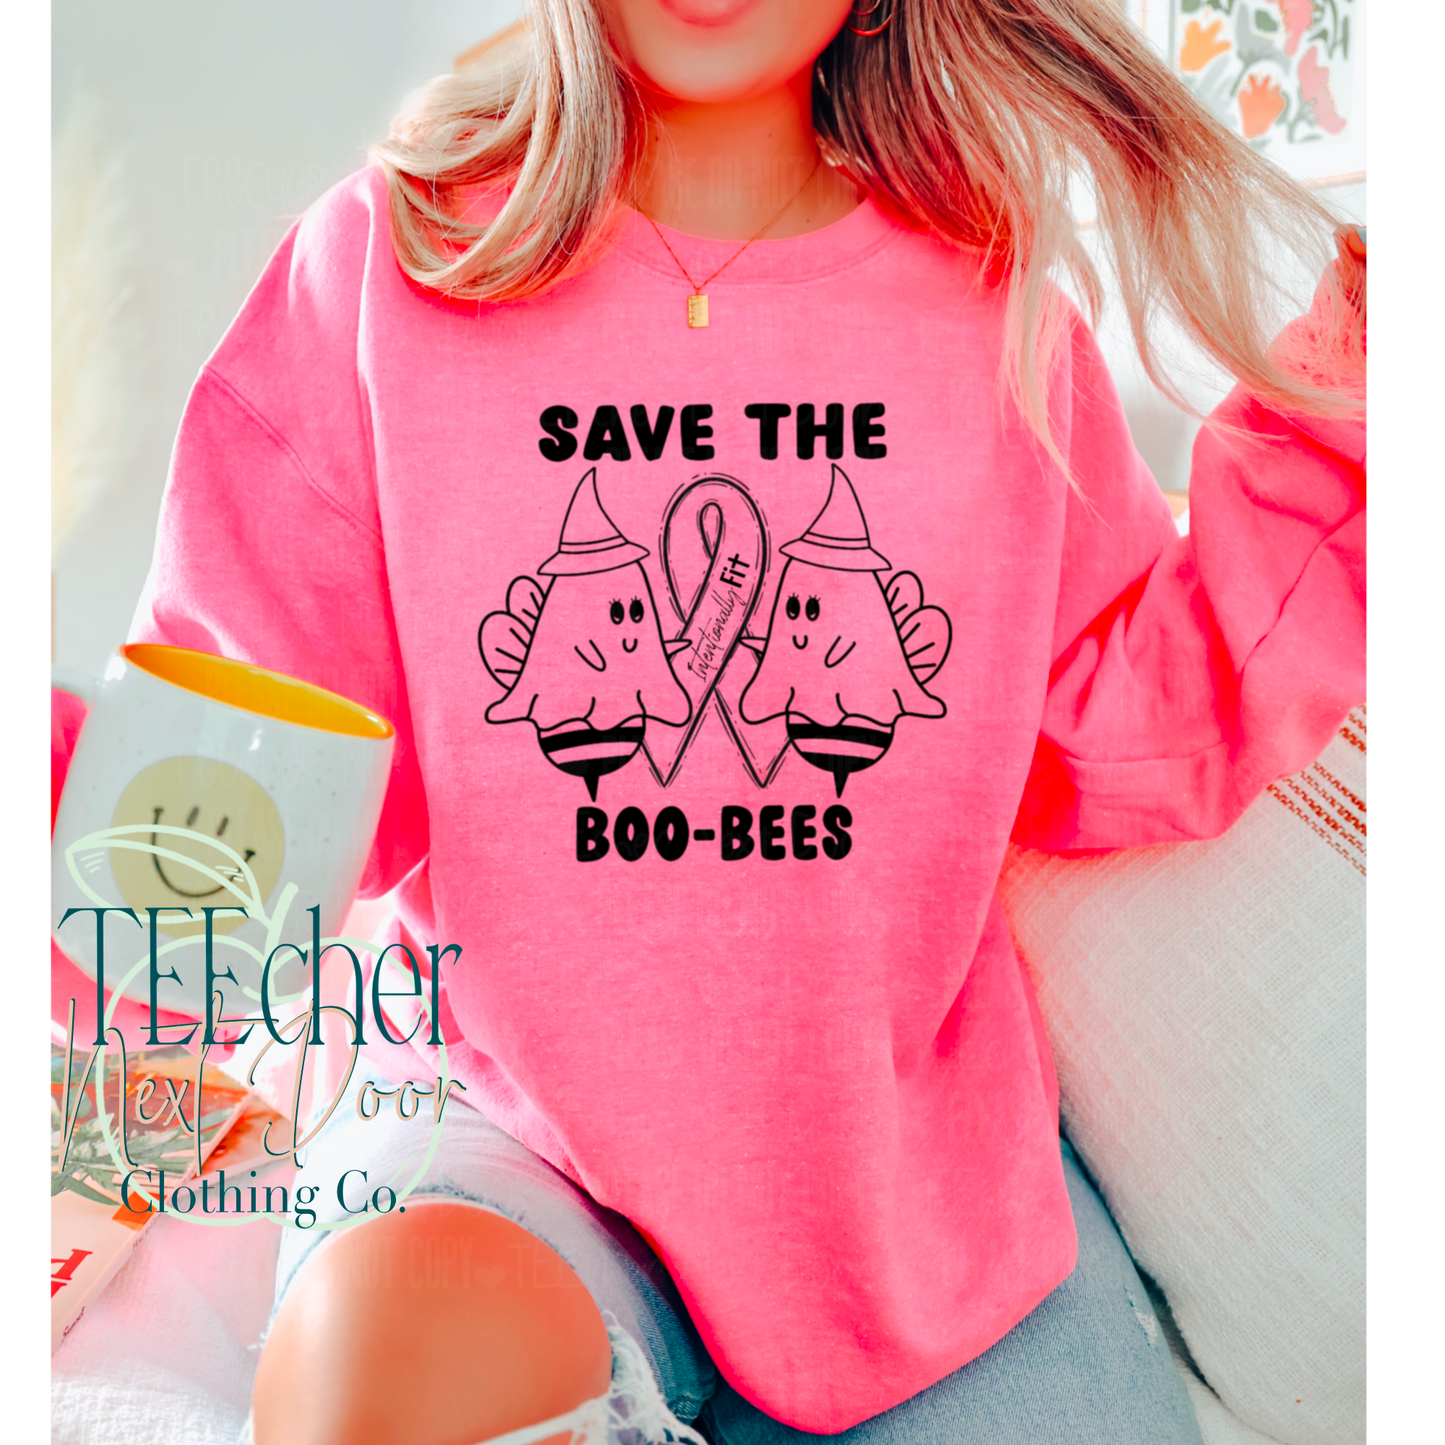 Save the BOO-BEES!